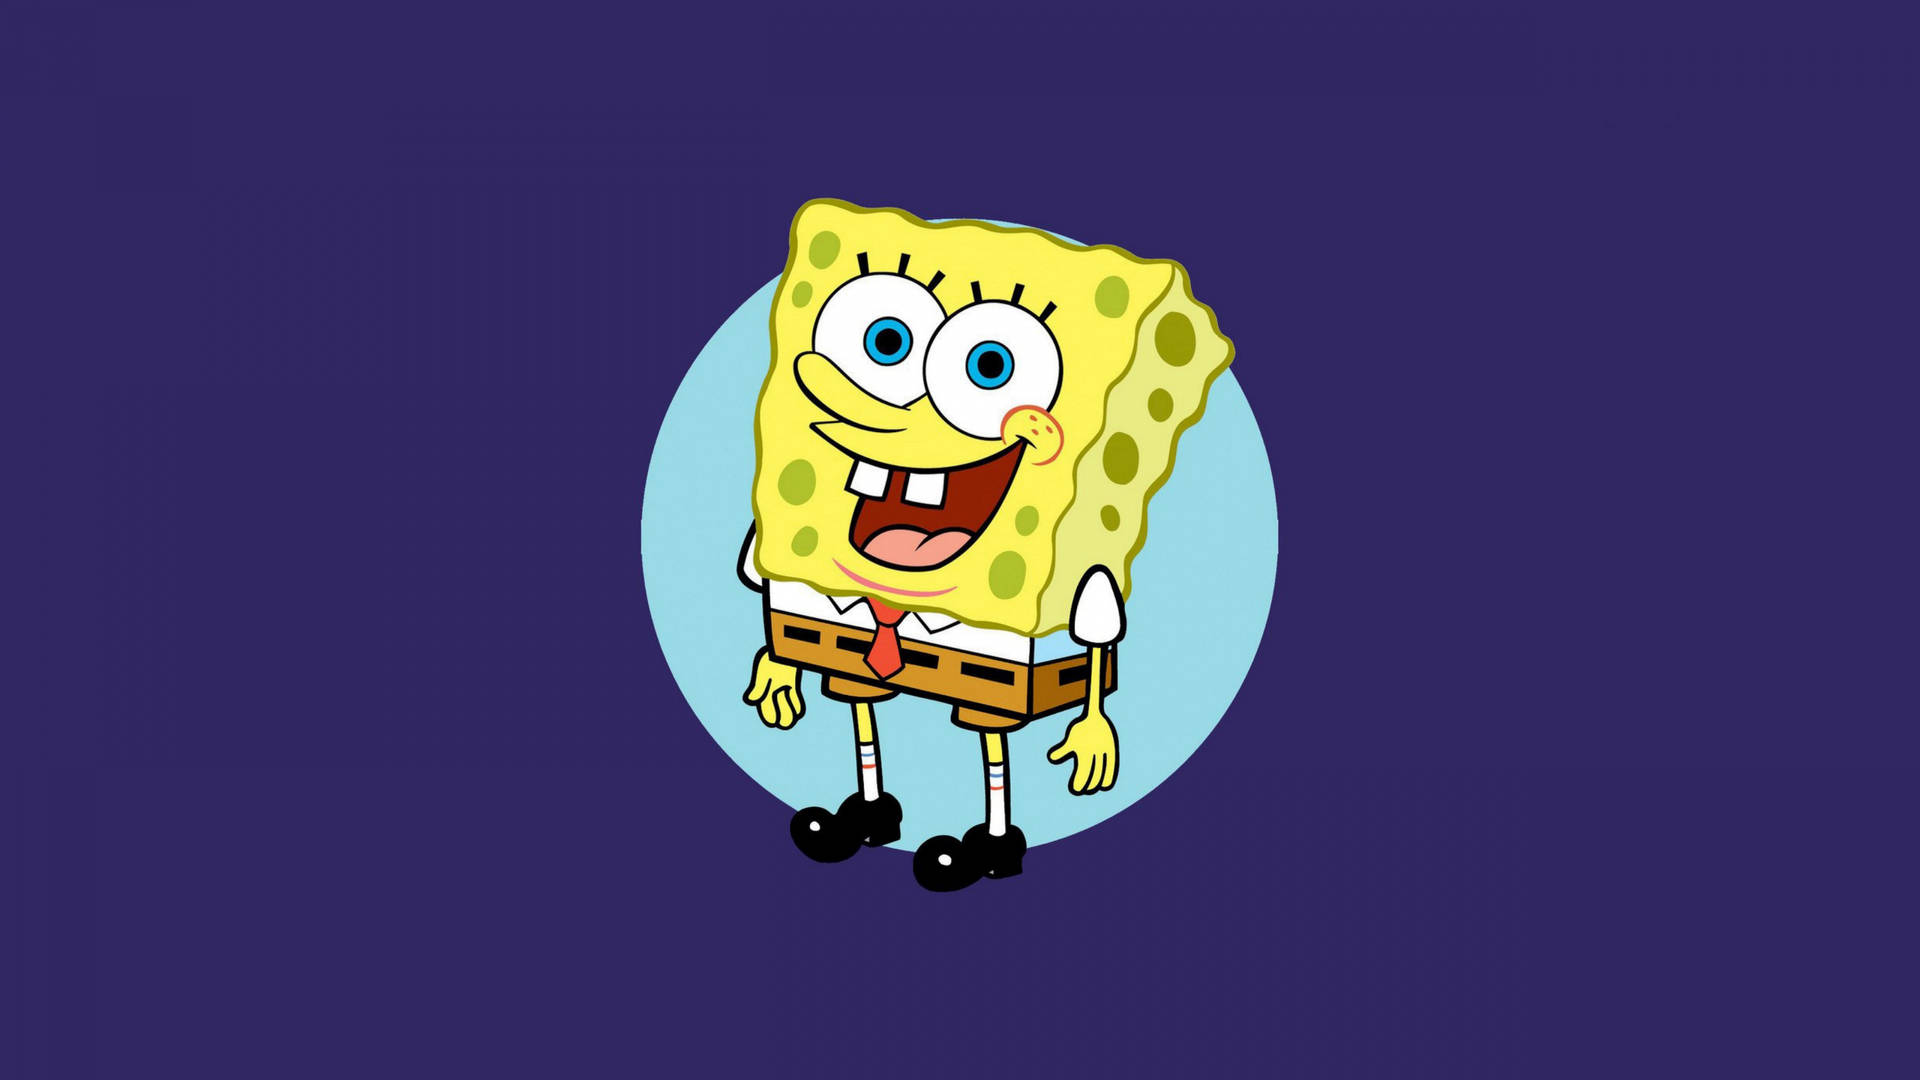 Stay Cool With Spongebob and His Friends Wallpaper